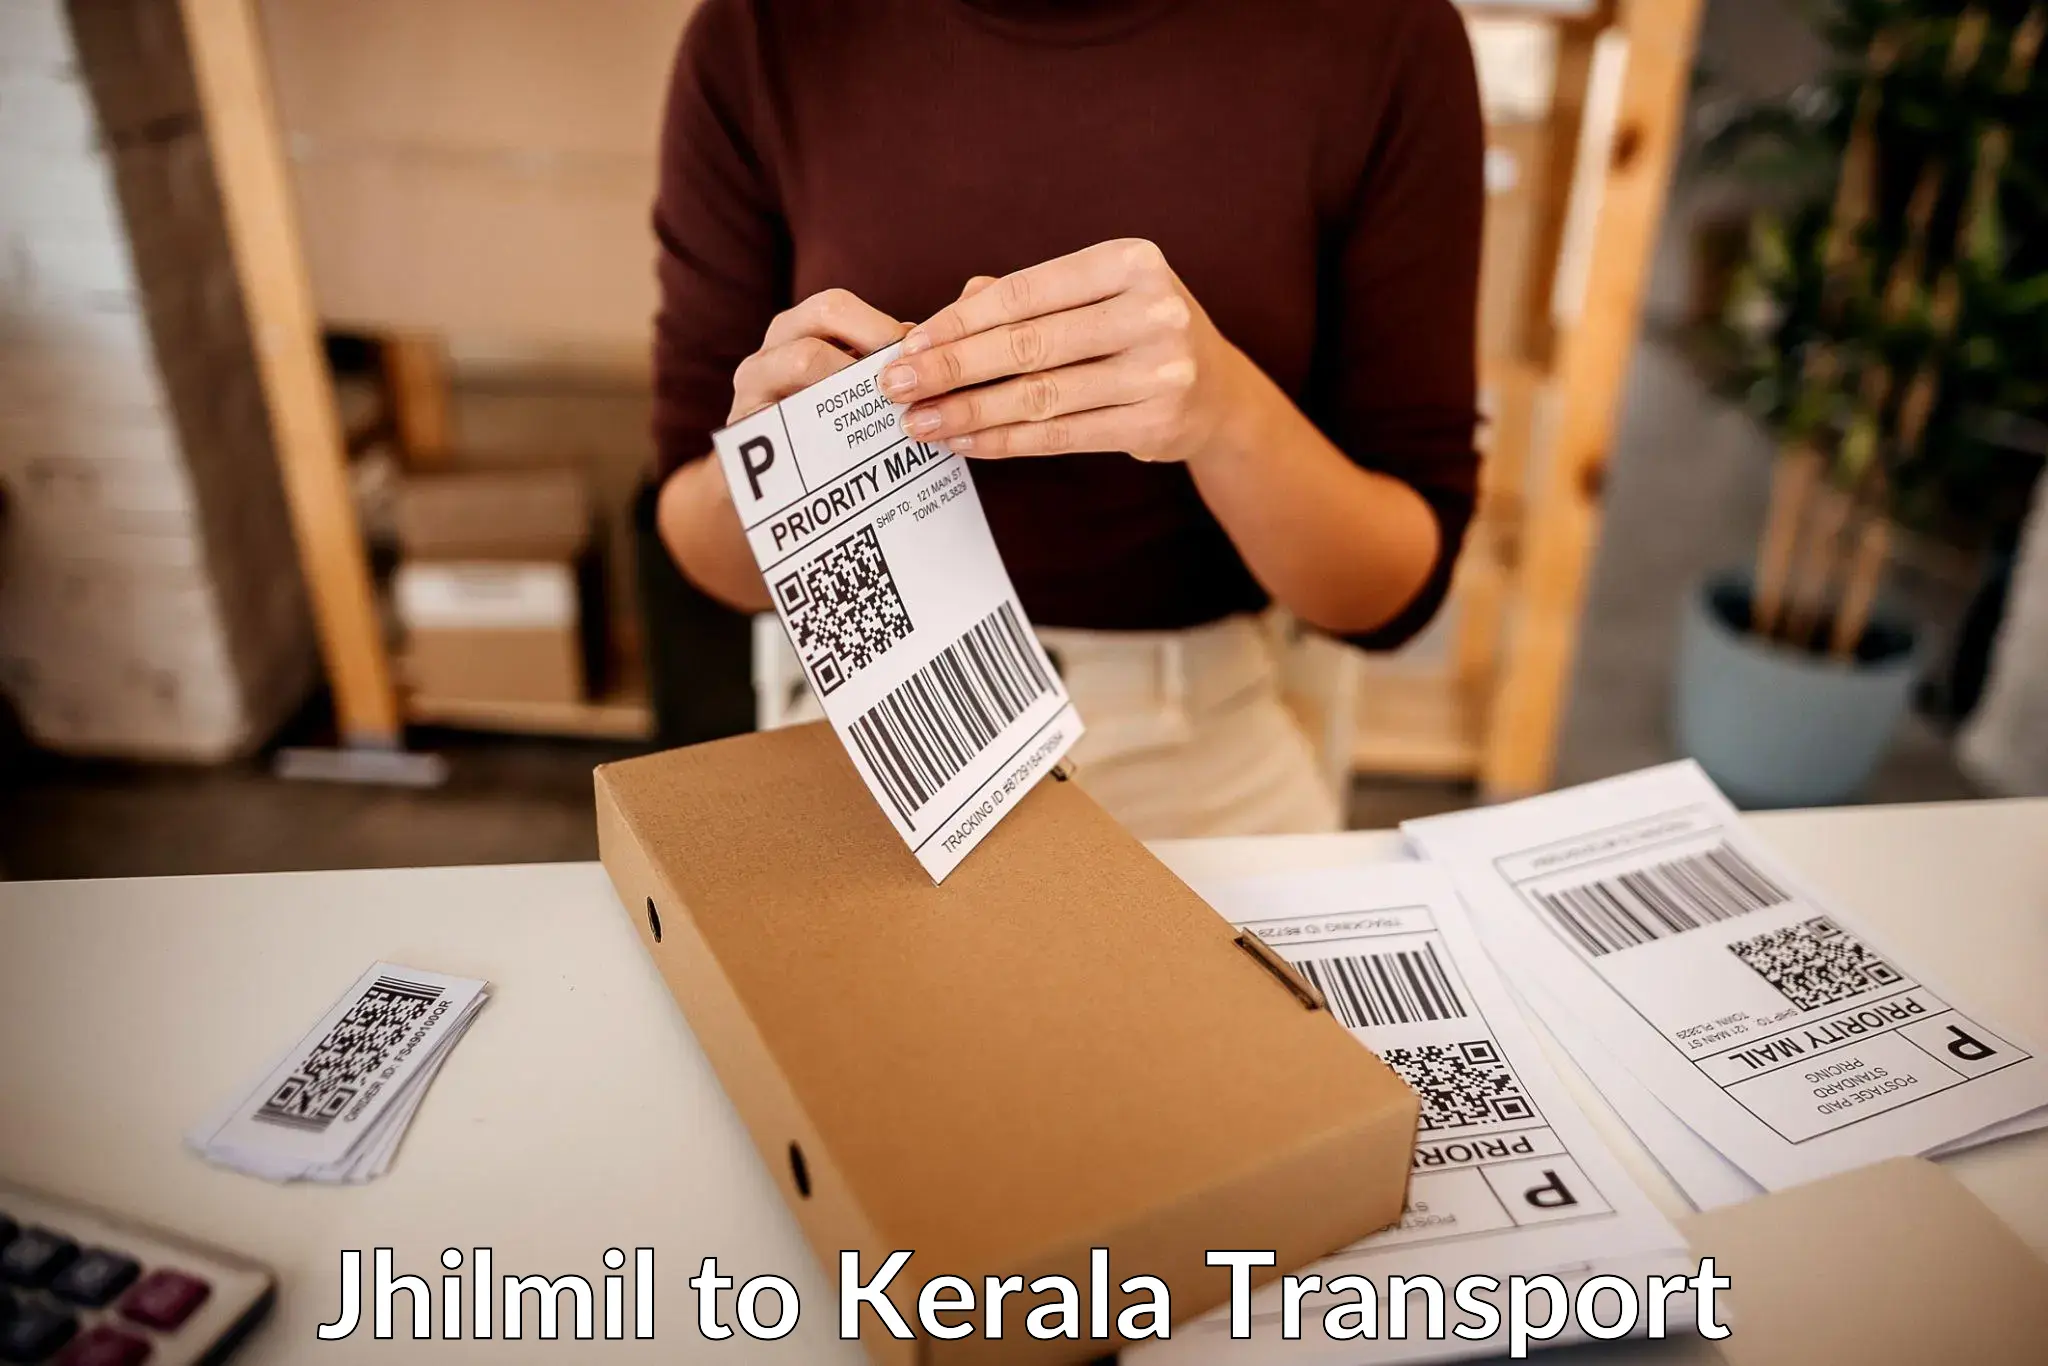 Shipping services Jhilmil to Changanacherry